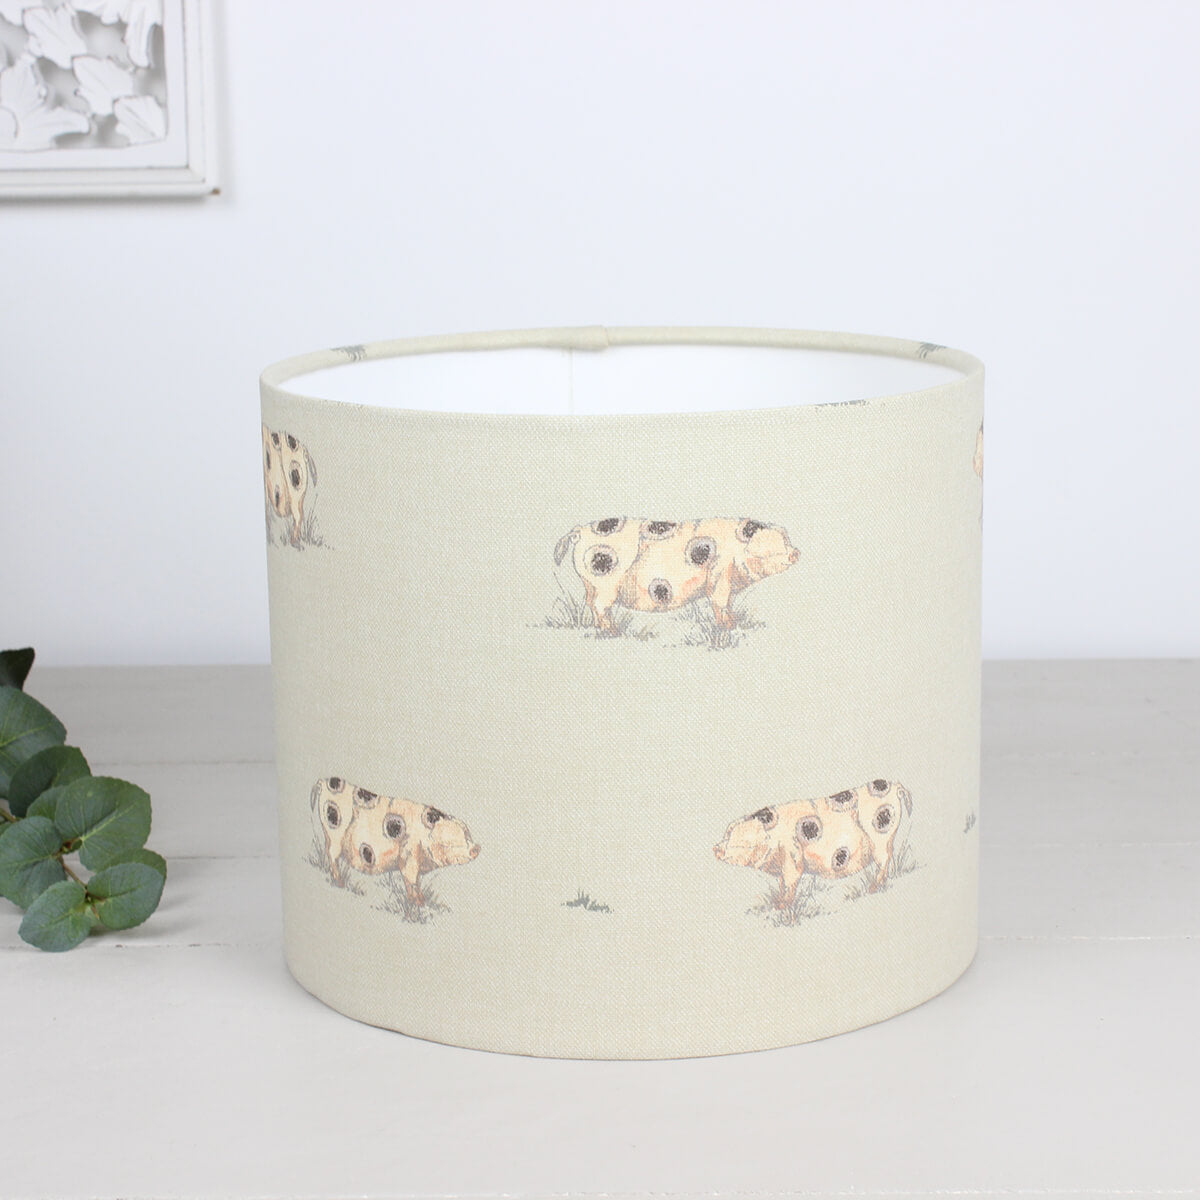 Old Spot Pig Country Drum Lampshade